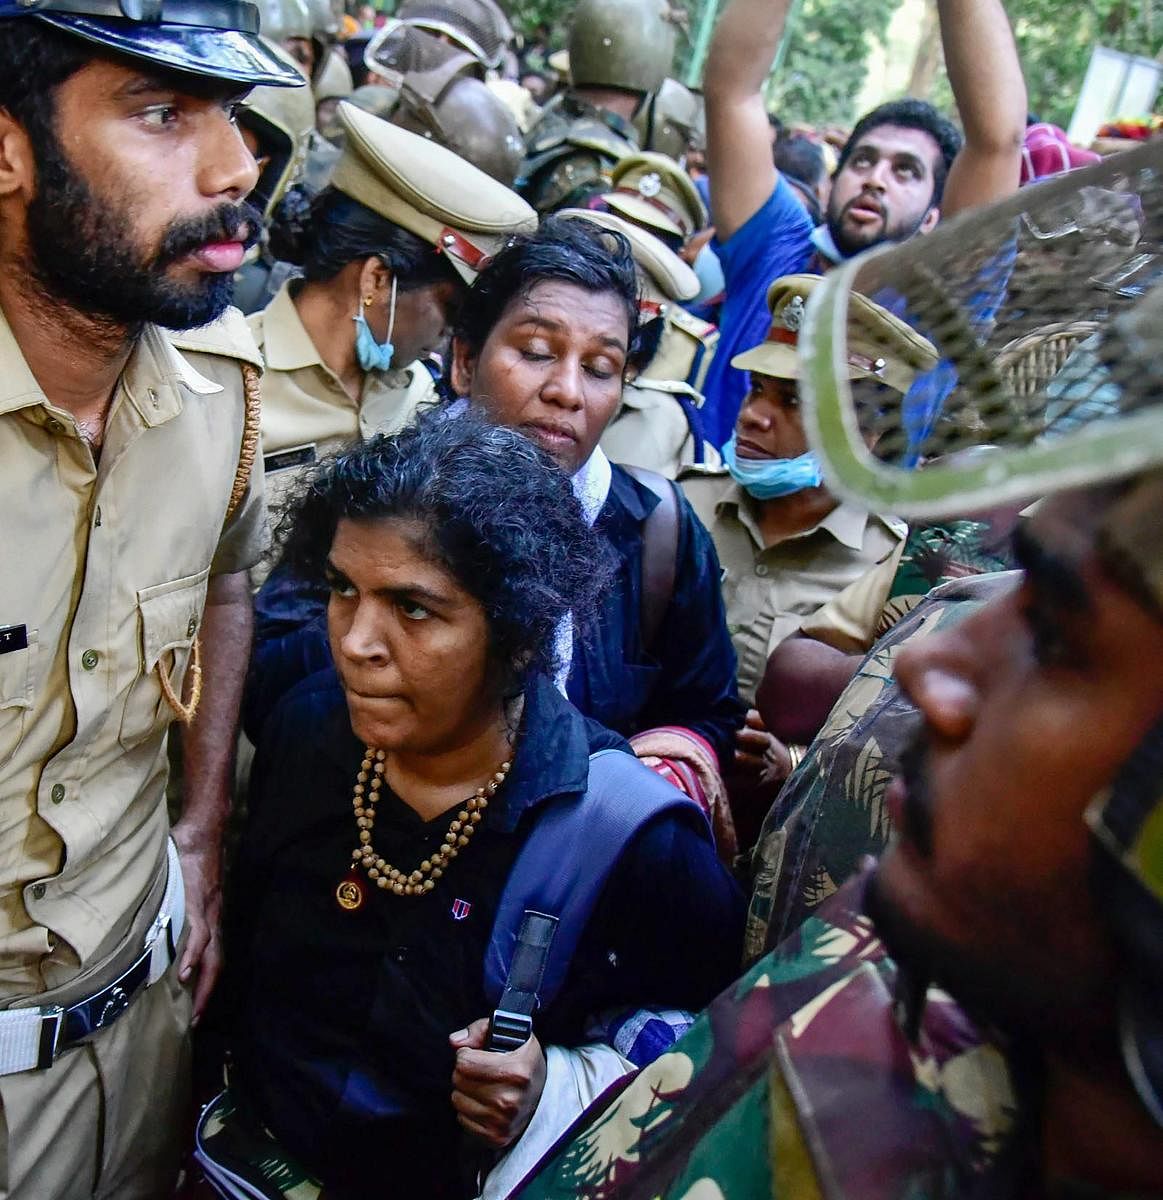 'Only 2 women of menstrual age visited Sabarimala'